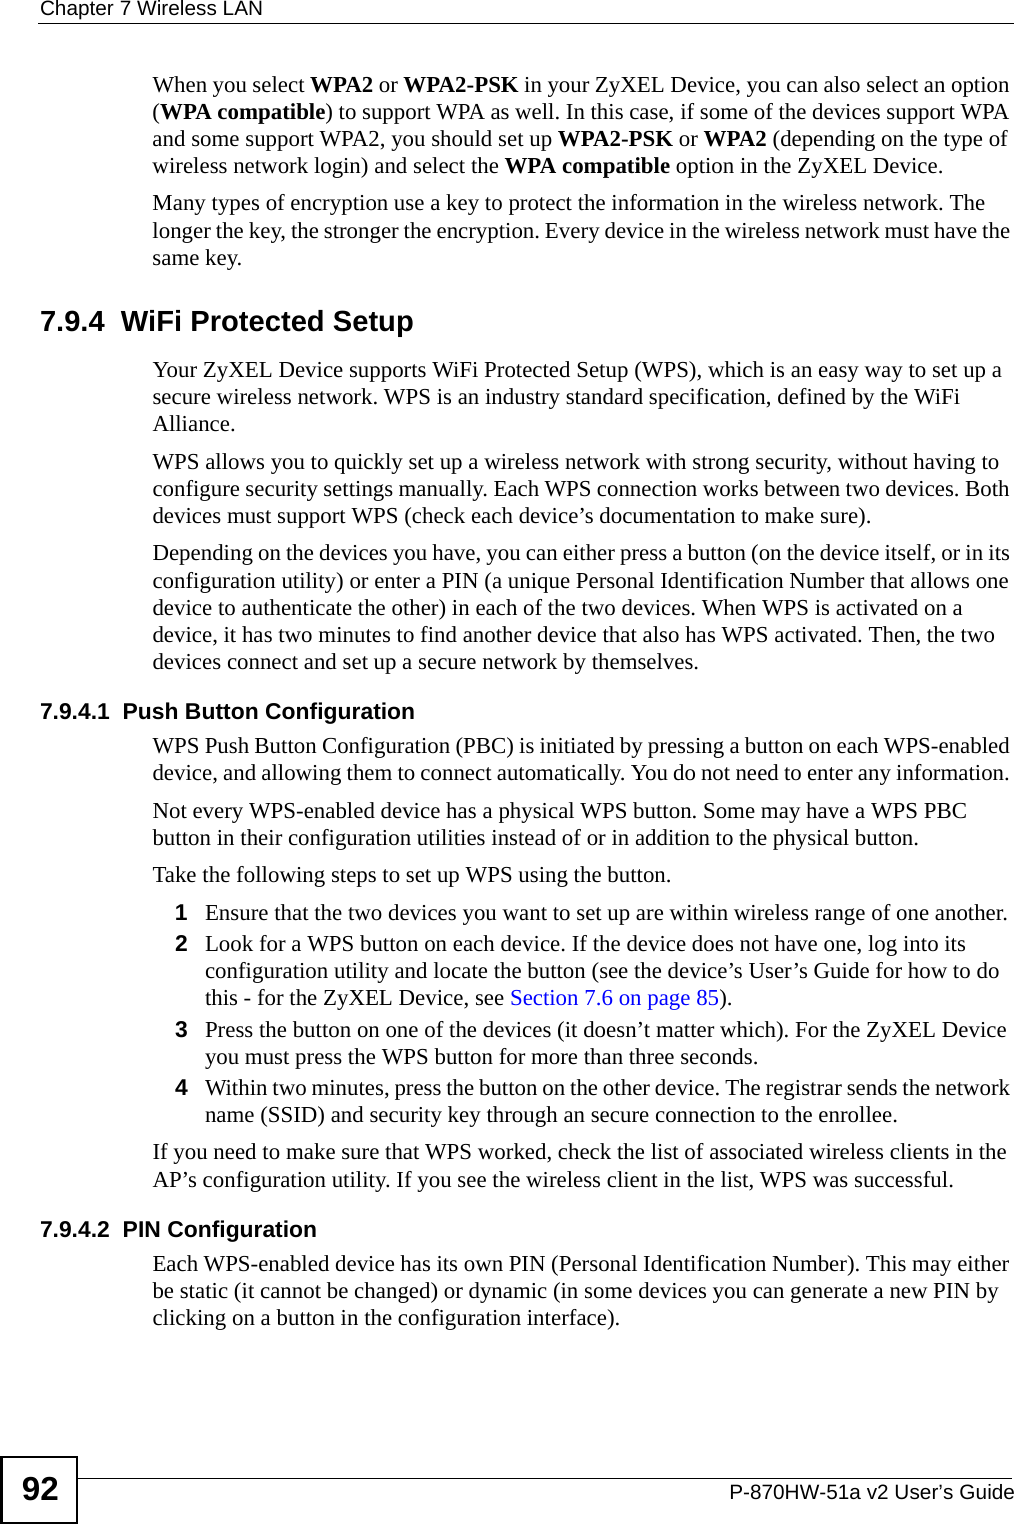 Chapter 7 Wireless LANP-870HW-51a v2 User’s Guide92When you select WPA2 or WPA2-PSK in your ZyXEL Device, you can also select an option (WPA compatible) to support WPA as well. In this case, if some of the devices support WPA and some support WPA2, you should set up WPA2-PSK or WPA2 (depending on the type of wireless network login) and select the WPA compatible option in the ZyXEL Device.Many types of encryption use a key to protect the information in the wireless network. The longer the key, the stronger the encryption. Every device in the wireless network must have the same key.7.9.4  WiFi Protected SetupYour ZyXEL Device supports WiFi Protected Setup (WPS), which is an easy way to set up a secure wireless network. WPS is an industry standard specification, defined by the WiFi Alliance.WPS allows you to quickly set up a wireless network with strong security, without having to configure security settings manually. Each WPS connection works between two devices. Both devices must support WPS (check each device’s documentation to make sure). Depending on the devices you have, you can either press a button (on the device itself, or in its configuration utility) or enter a PIN (a unique Personal Identification Number that allows one device to authenticate the other) in each of the two devices. When WPS is activated on a device, it has two minutes to find another device that also has WPS activated. Then, the two devices connect and set up a secure network by themselves.7.9.4.1  Push Button ConfigurationWPS Push Button Configuration (PBC) is initiated by pressing a button on each WPS-enabled device, and allowing them to connect automatically. You do not need to enter any information. Not every WPS-enabled device has a physical WPS button. Some may have a WPS PBC button in their configuration utilities instead of or in addition to the physical button.Take the following steps to set up WPS using the button.1Ensure that the two devices you want to set up are within wireless range of one another. 2Look for a WPS button on each device. If the device does not have one, log into its configuration utility and locate the button (see the device’s User’s Guide for how to do this - for the ZyXEL Device, see Section 7.6 on page 85).3Press the button on one of the devices (it doesn’t matter which). For the ZyXEL Device you must press the WPS button for more than three seconds.4Within two minutes, press the button on the other device. The registrar sends the network name (SSID) and security key through an secure connection to the enrollee.If you need to make sure that WPS worked, check the list of associated wireless clients in the AP’s configuration utility. If you see the wireless client in the list, WPS was successful.7.9.4.2  PIN ConfigurationEach WPS-enabled device has its own PIN (Personal Identification Number). This may either be static (it cannot be changed) or dynamic (in some devices you can generate a new PIN by clicking on a button in the configuration interface). 